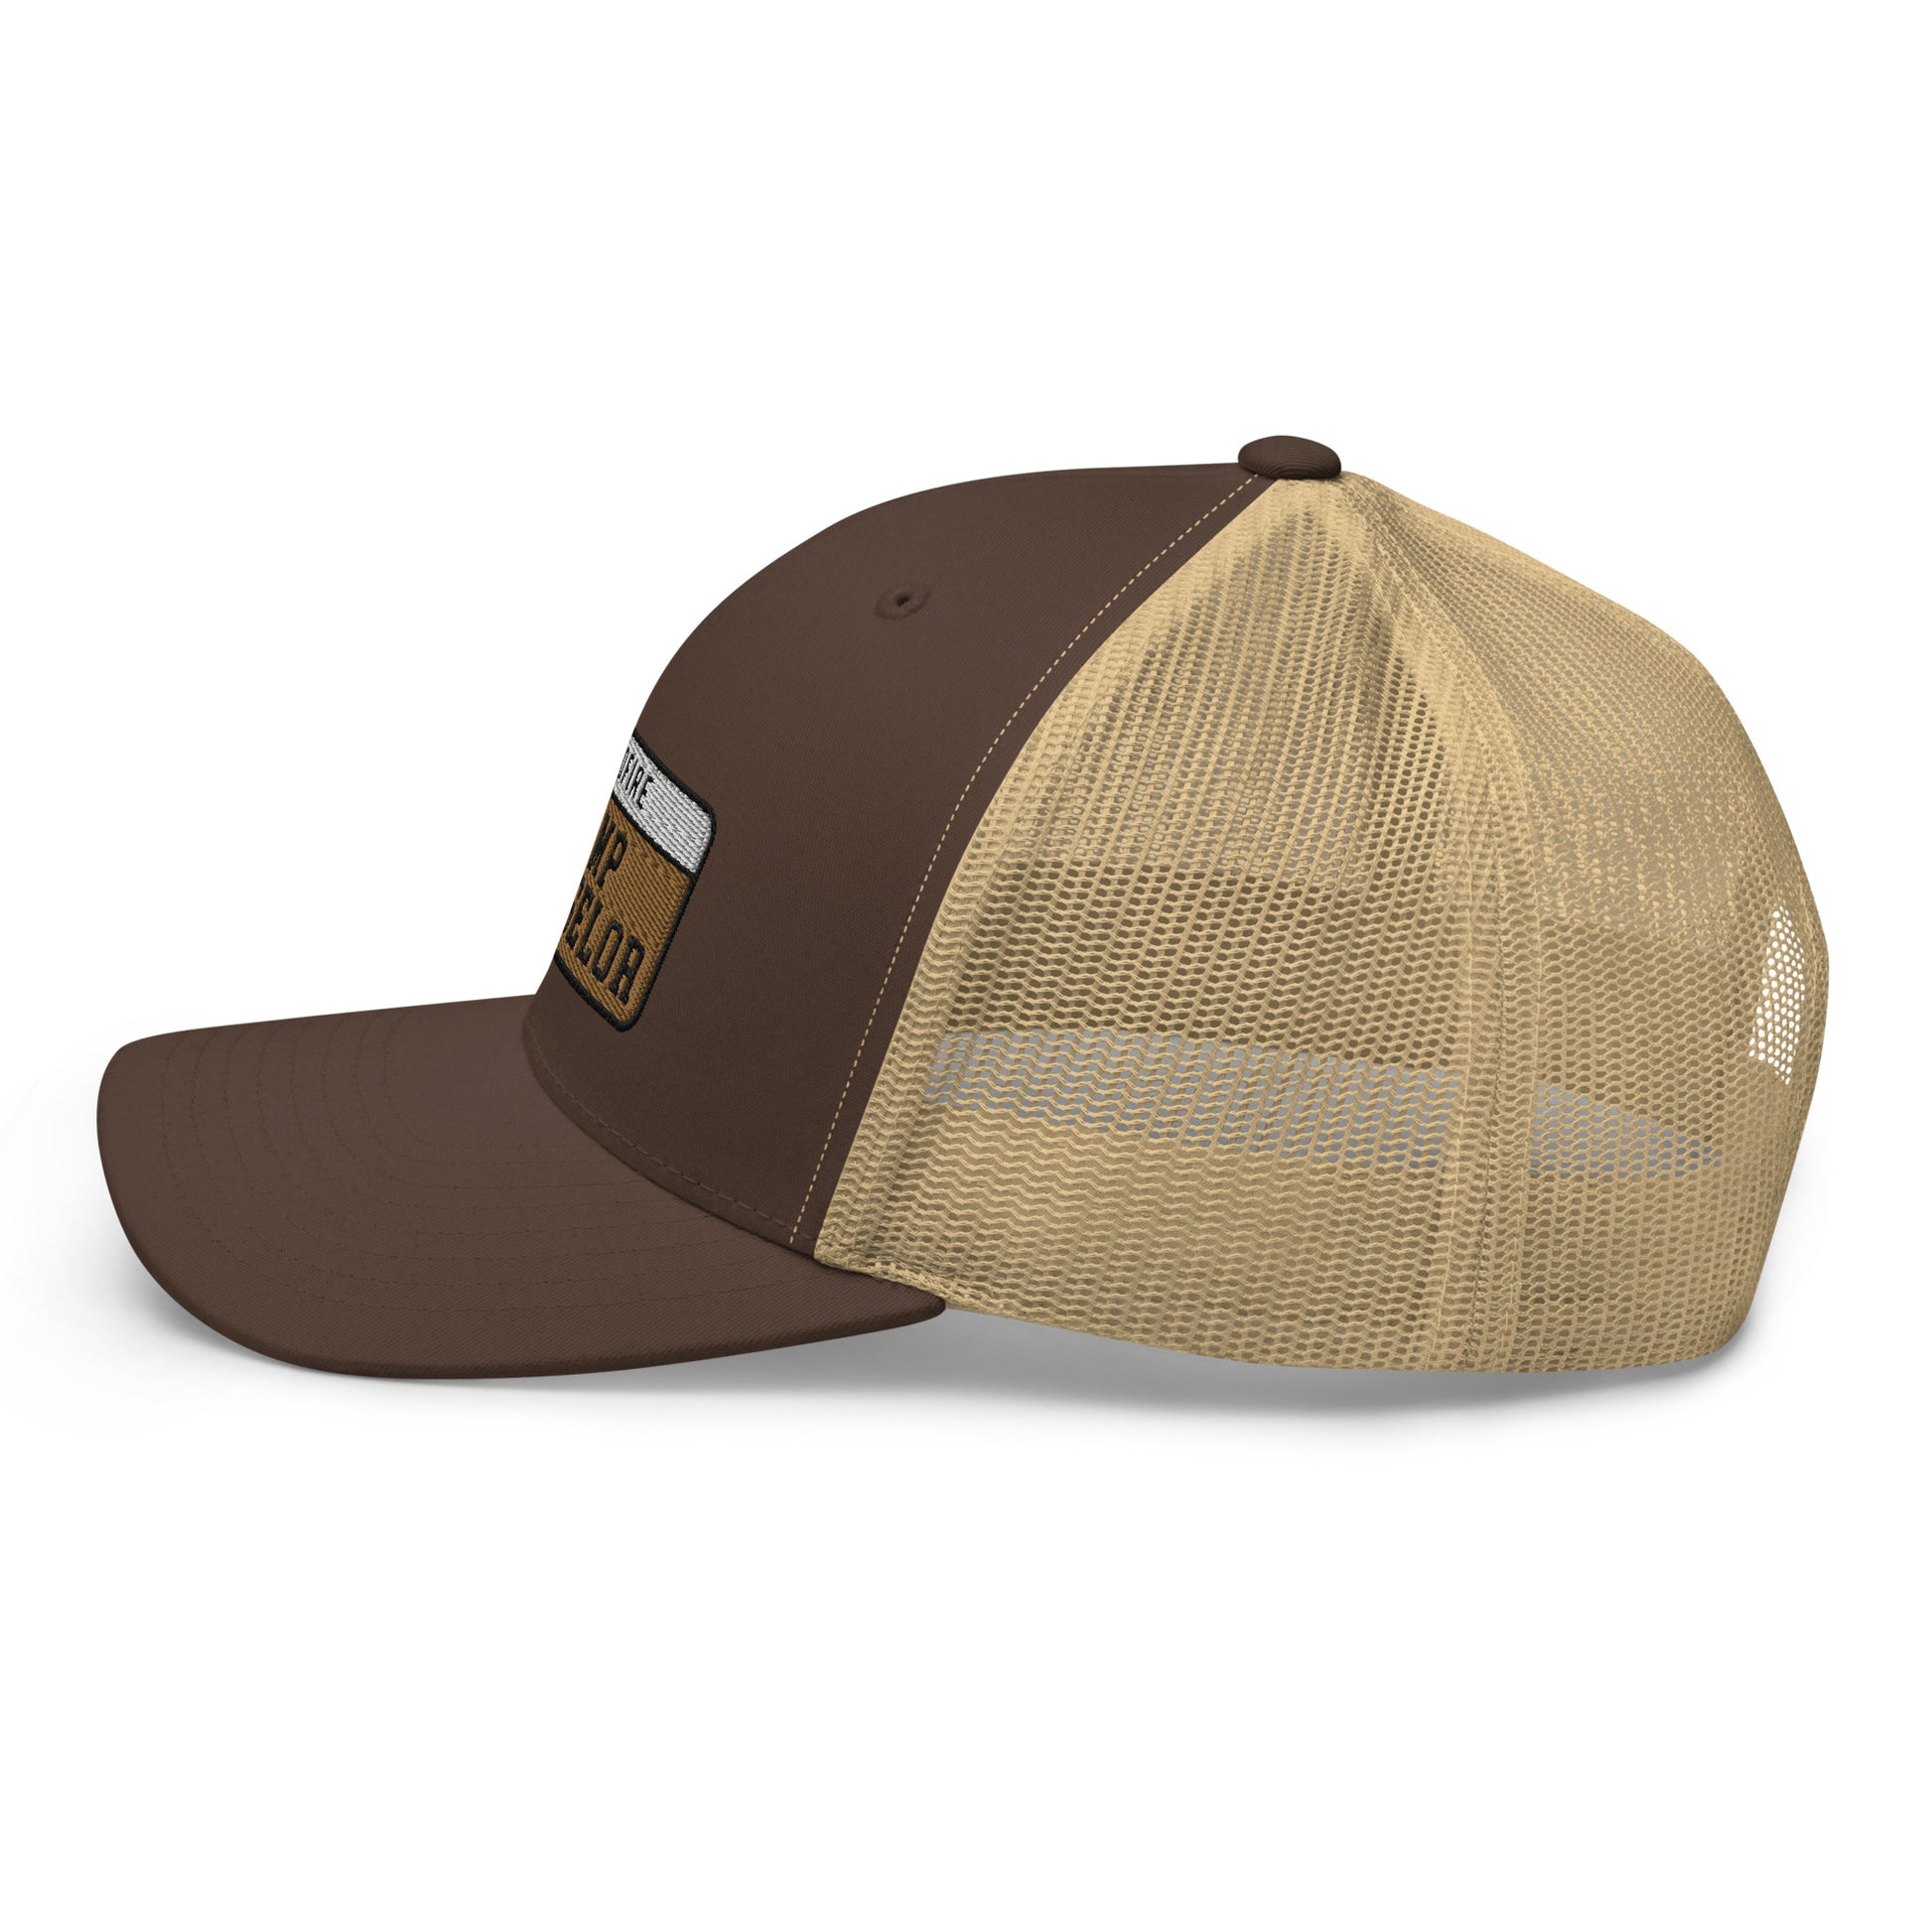 Wildfire Cigars embroidered Camp Counselor retro trucker in brown and khaki facing the left